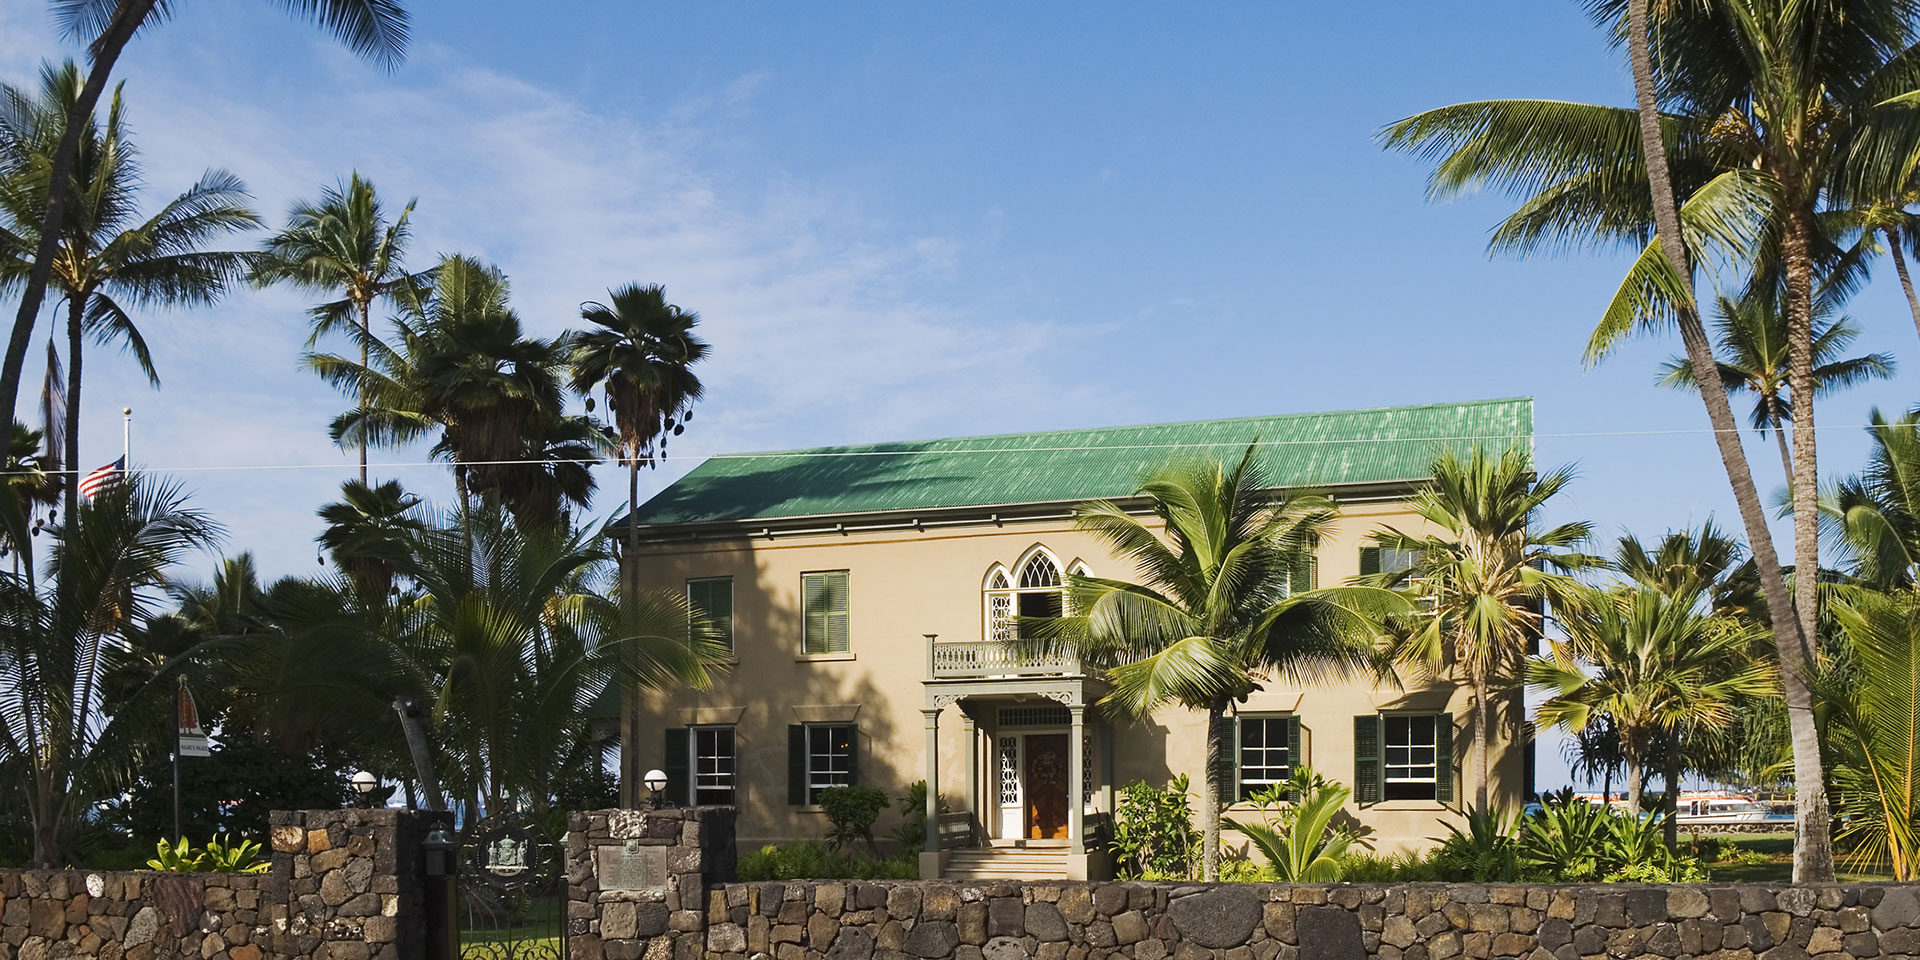 things to do on the big island